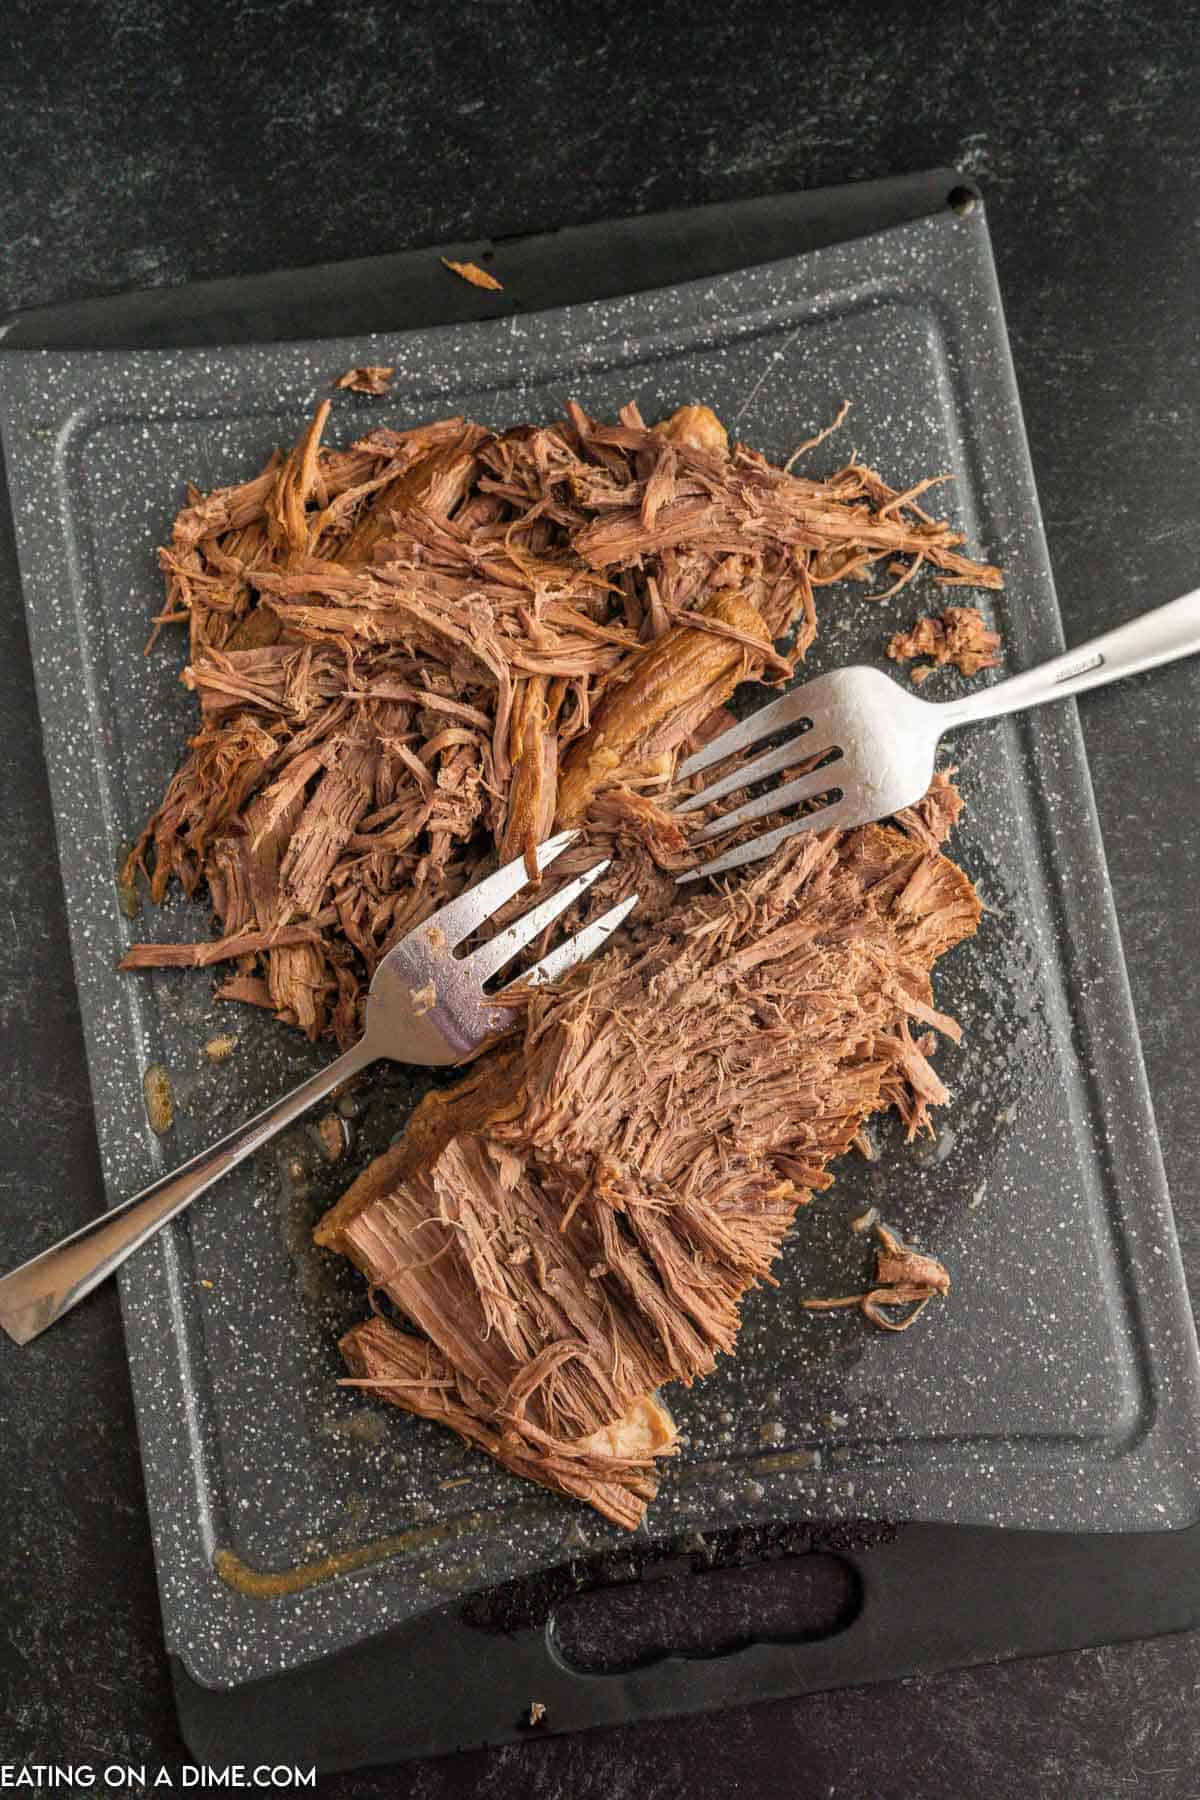 Shredded meat on the cutting board with two forks